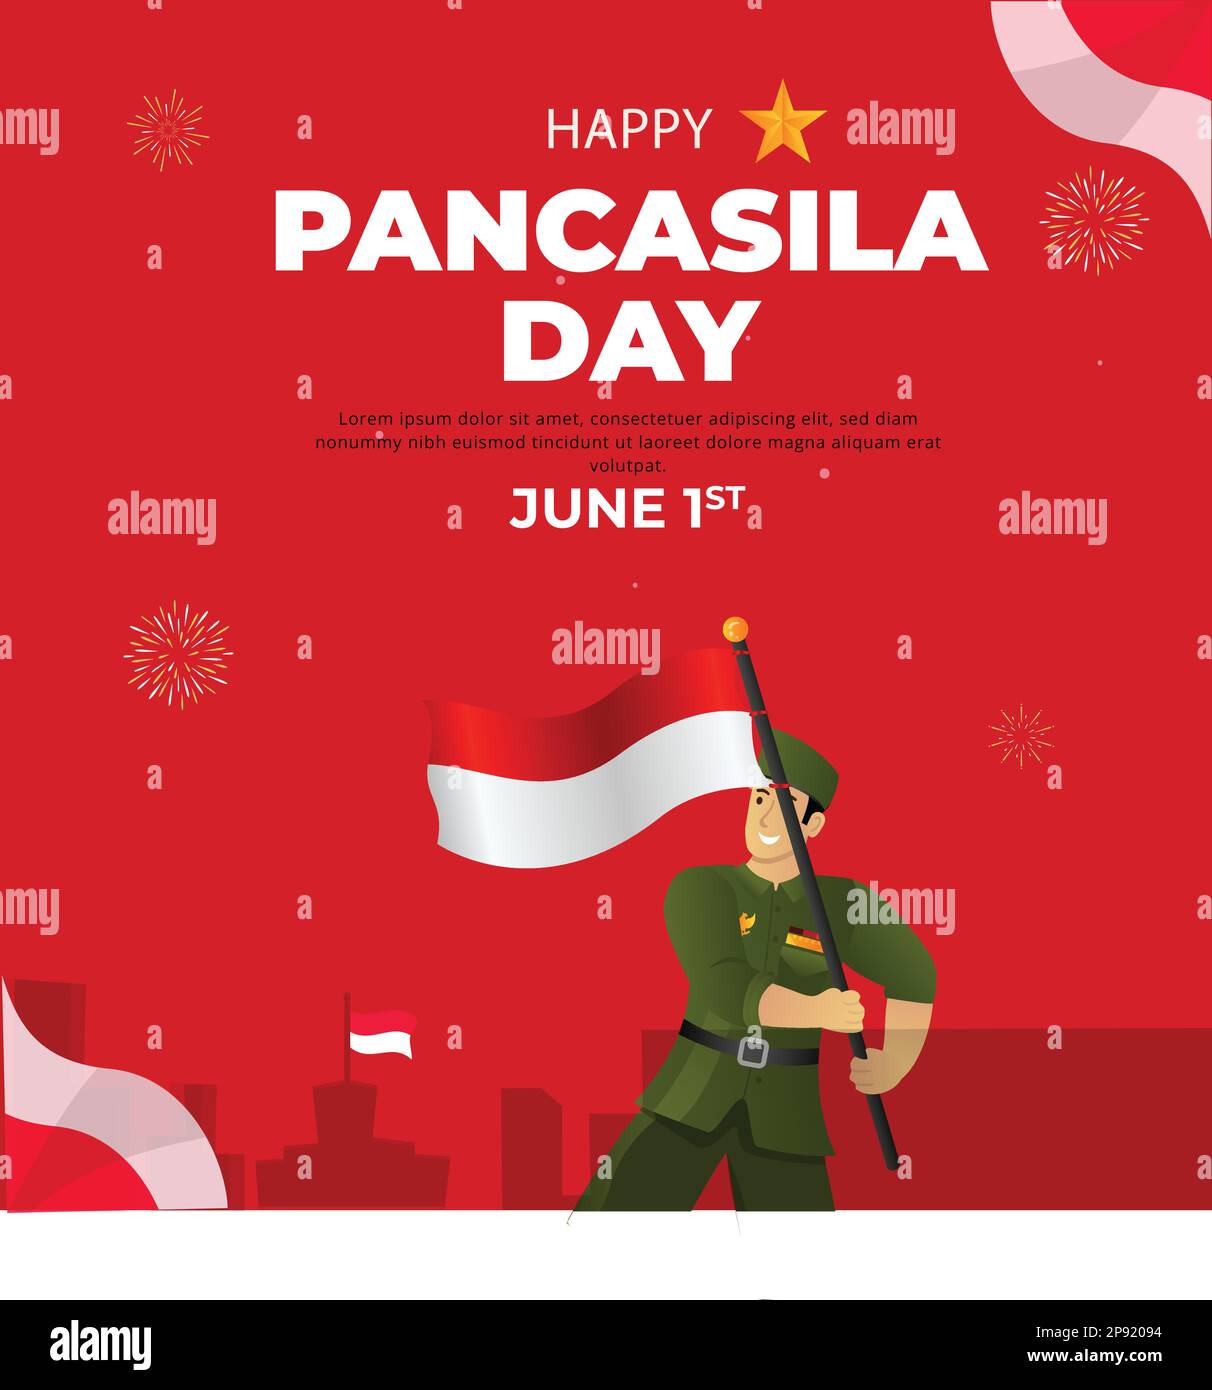 indonesia independence day 17 august Pancasila Day Stock Vector